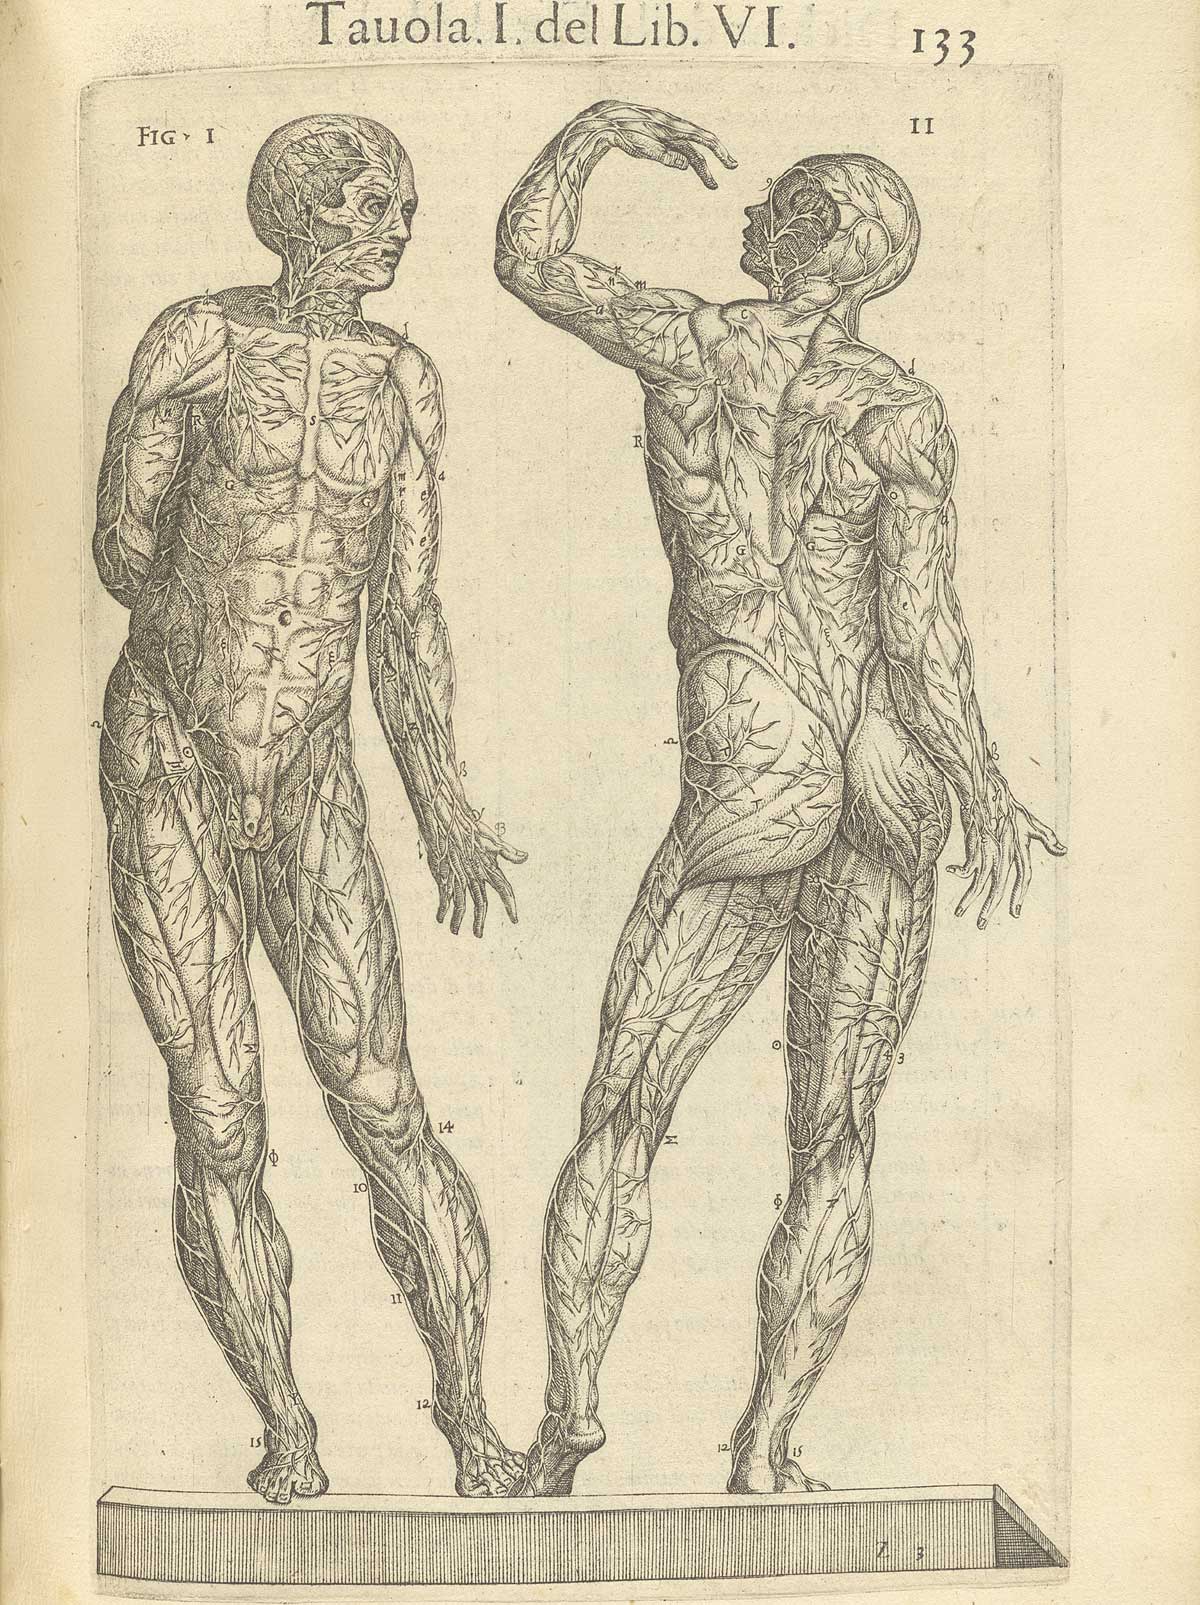 Page 133 of Juan Valverde de Amusco's Anatomia del corpo humano, featuring the front and back sides of a cadaver displaying the circulatory system.